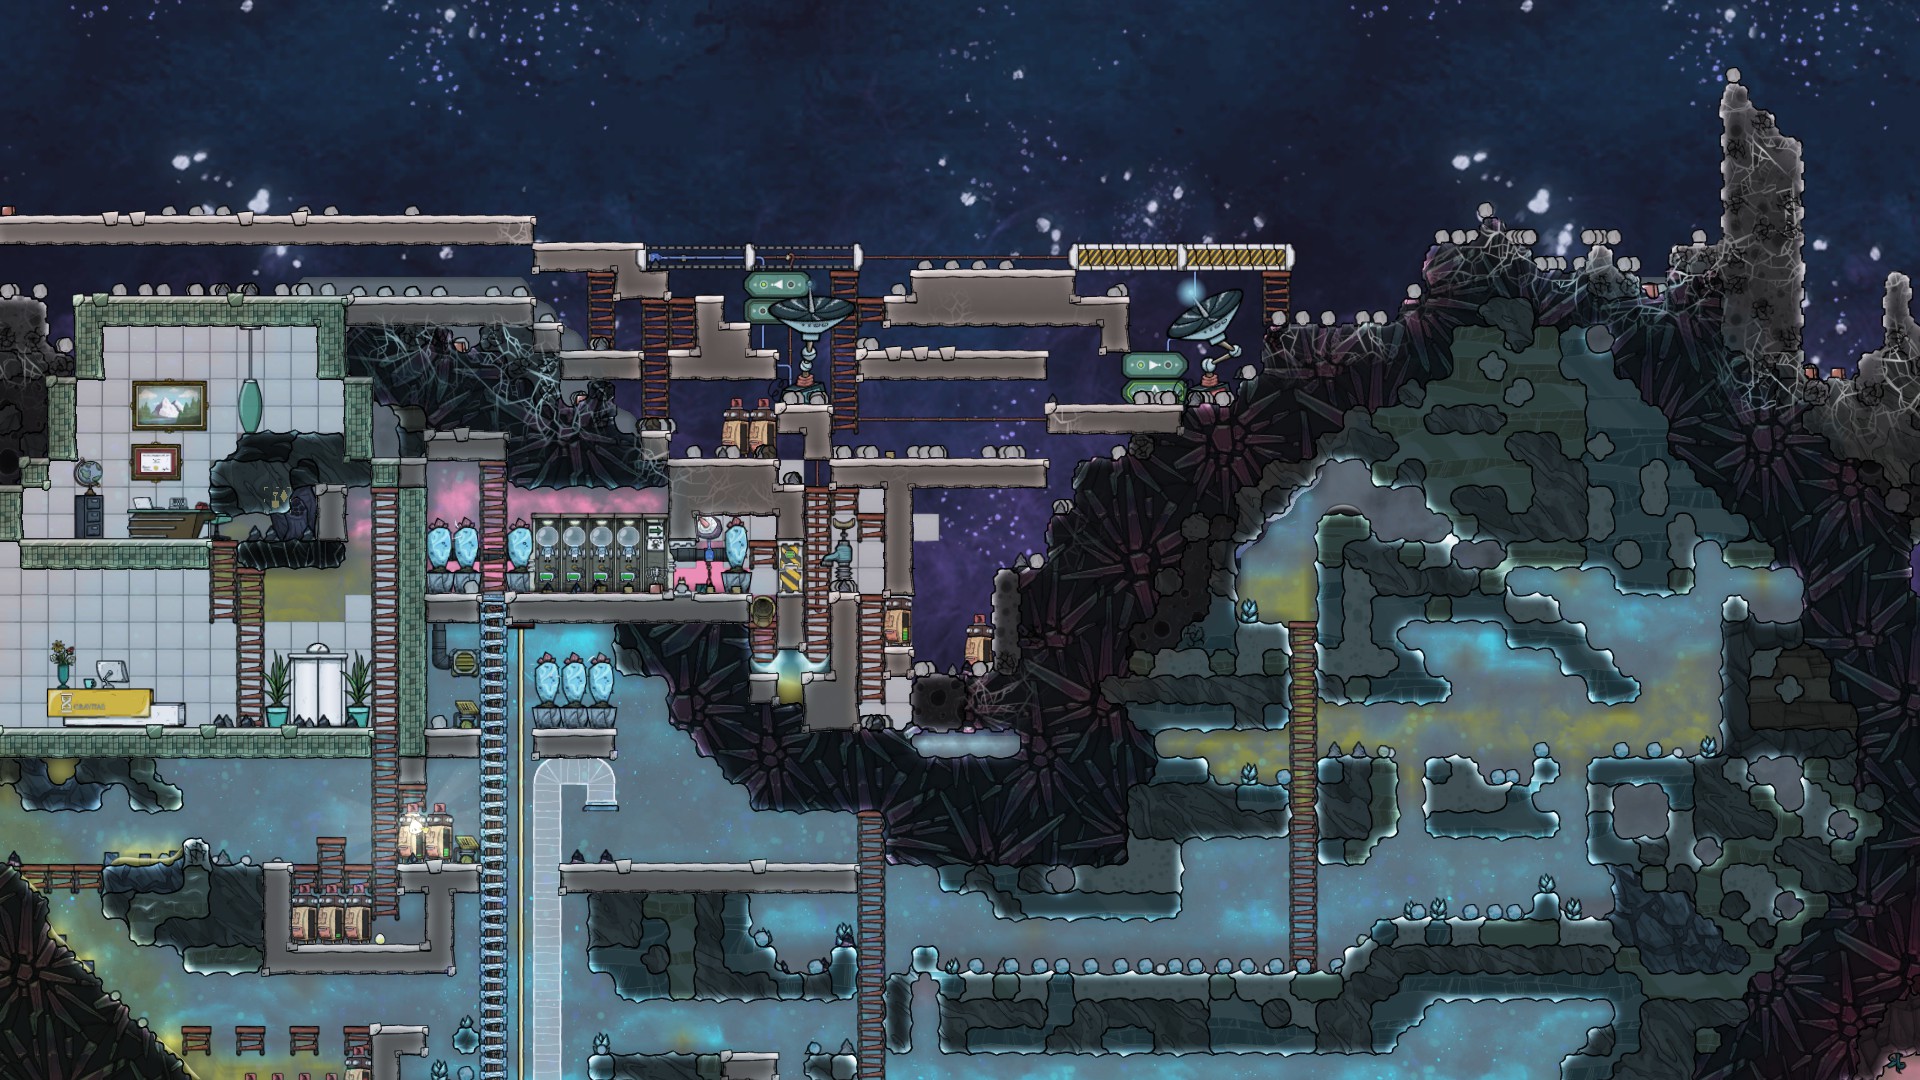 20180928123253 1 1920×1080 525 Kb - Oxygen Not Included Space , HD Wallpaper & Backgrounds